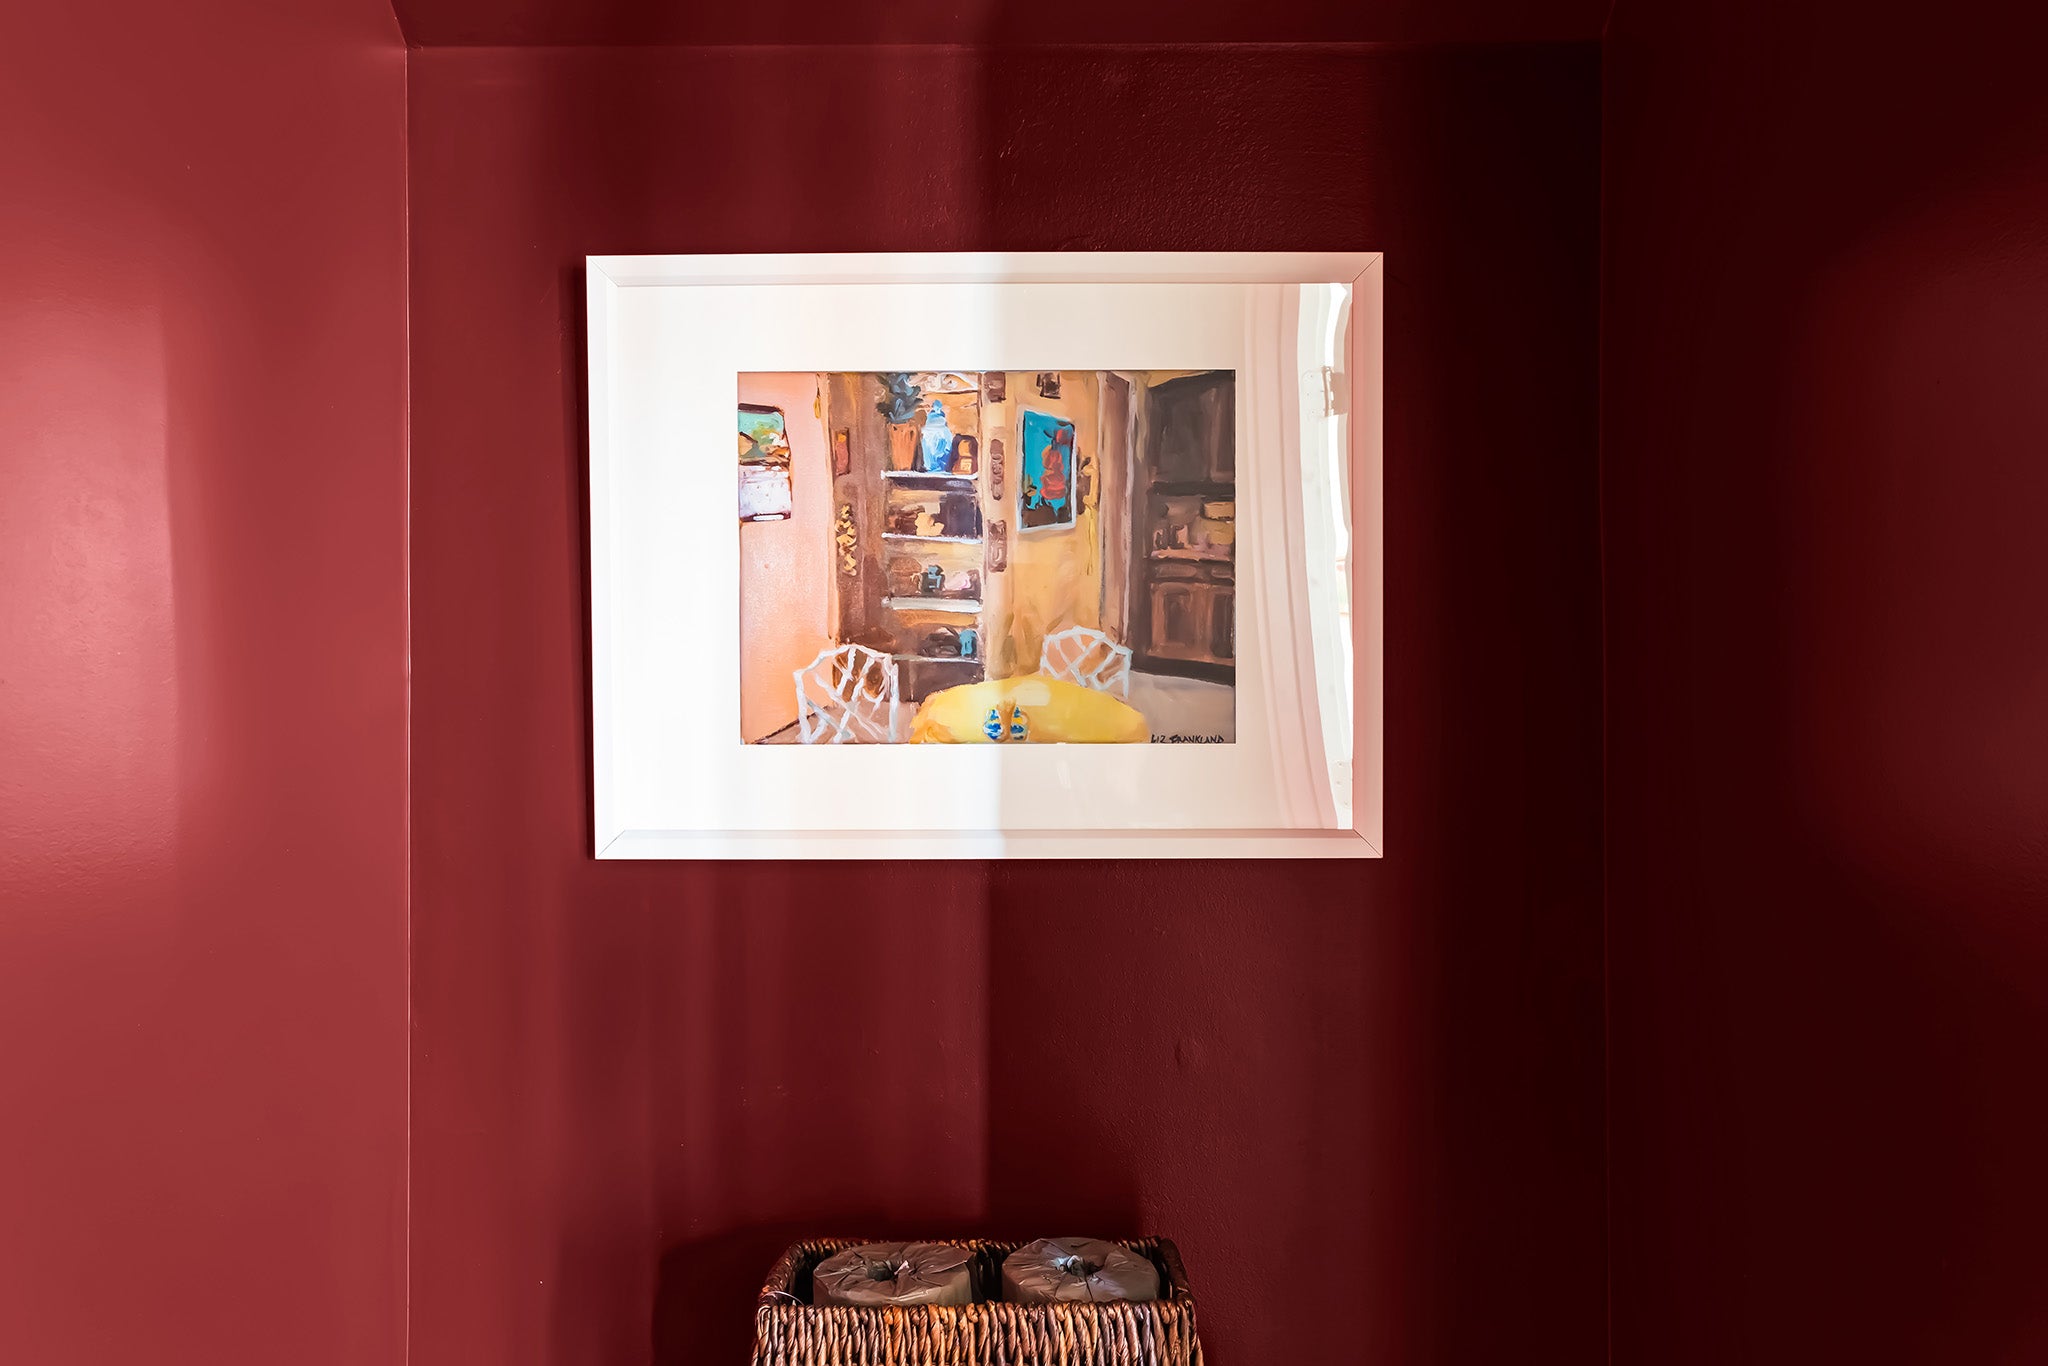 This print of the kitchen from the Golden Girls adds a little extra whimsy to this small space.